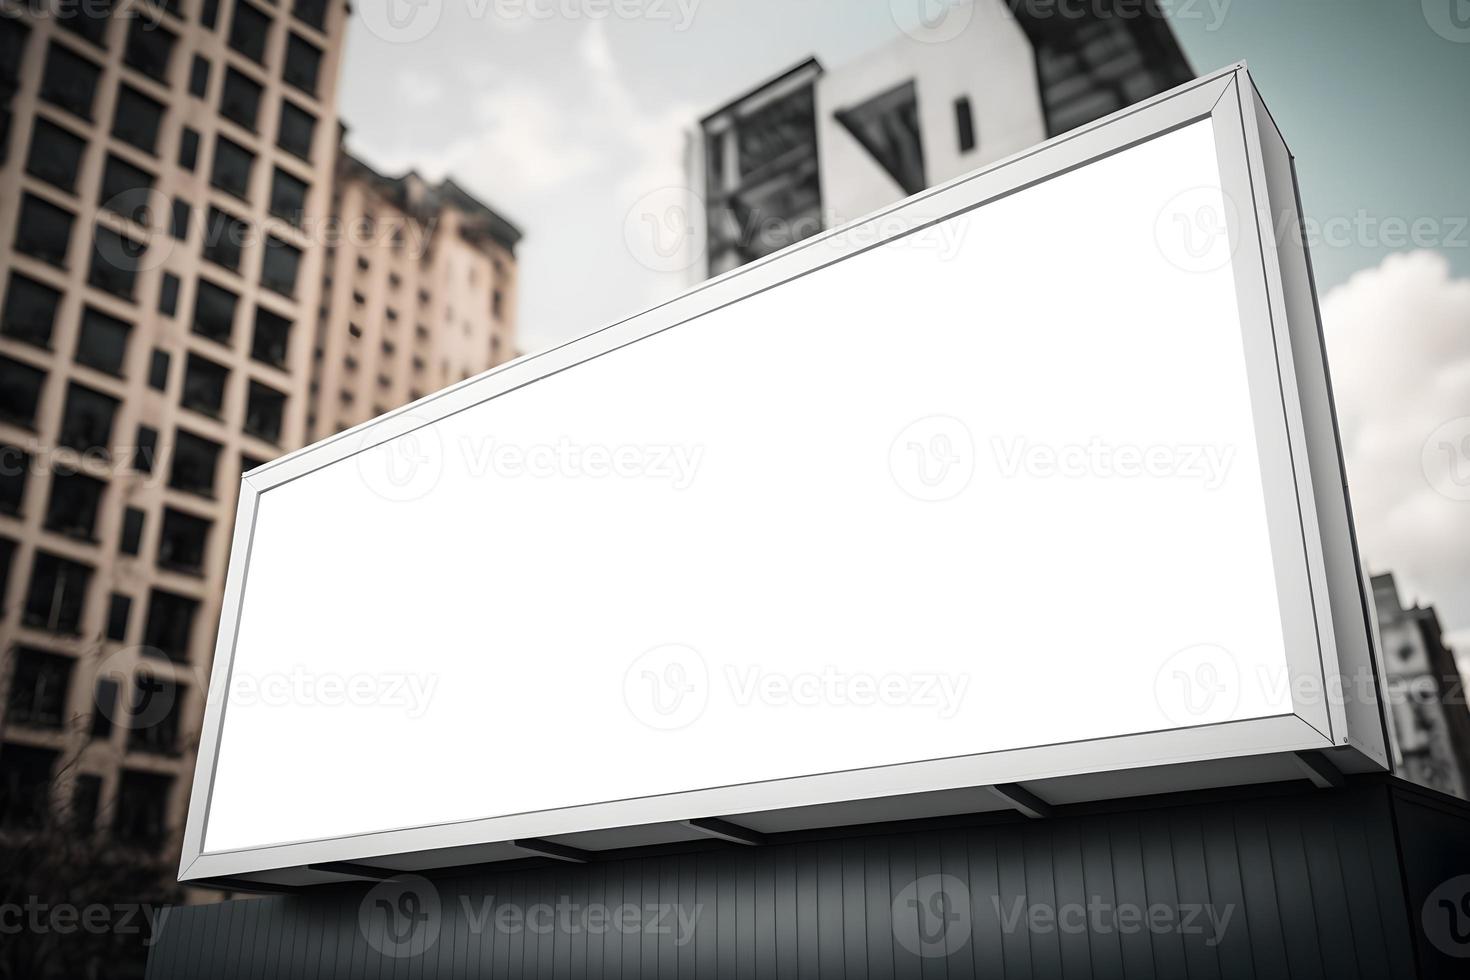 Blank landscape billboard on wall with buildings in background, Empty billboard on building , advertisement space for your marketing or promotion, Outdoor wall billboard in modern city, Pro Photo